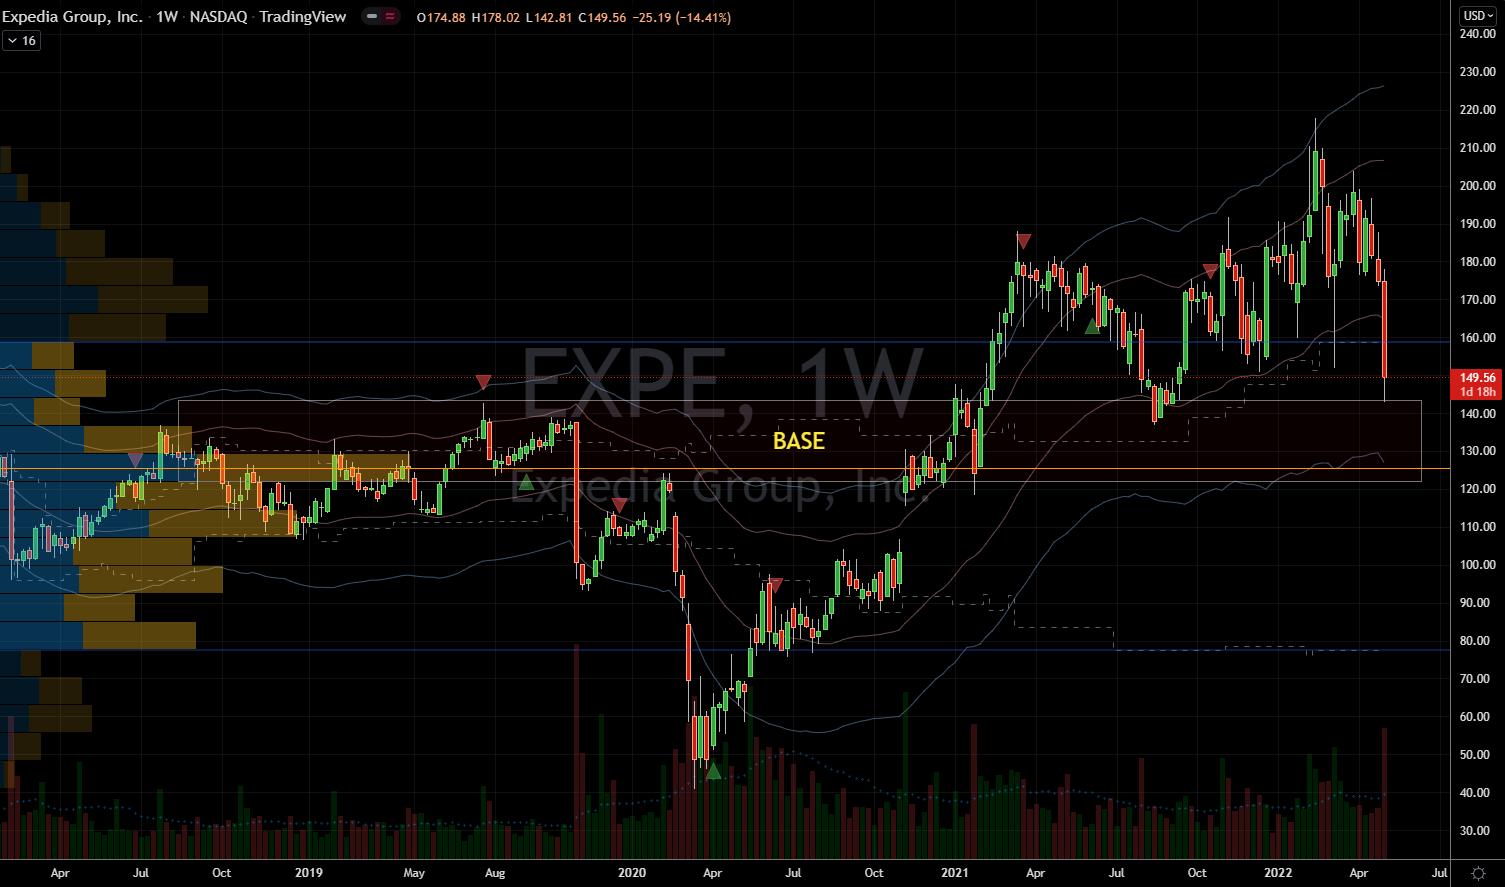 Stocks to Buy: Expedia (EXPE) Stock Chart Showing Rebound Potential